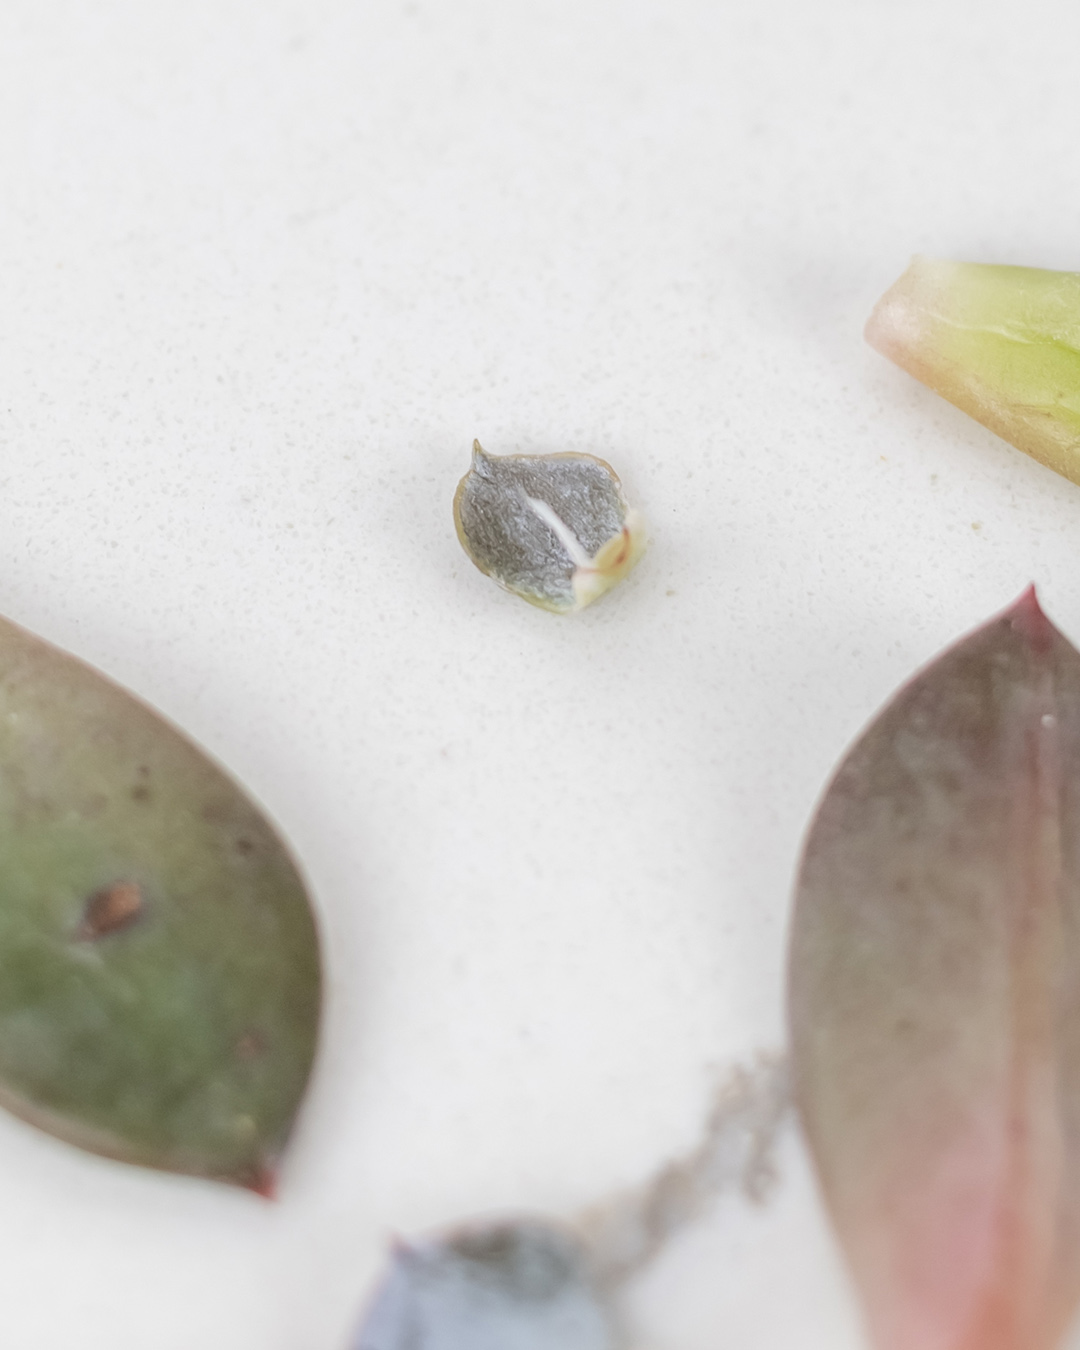 Learn how to propagate succulents using just a leaf taken from an existing plant! This is both really neat and a great way to grow yourself some free plants!